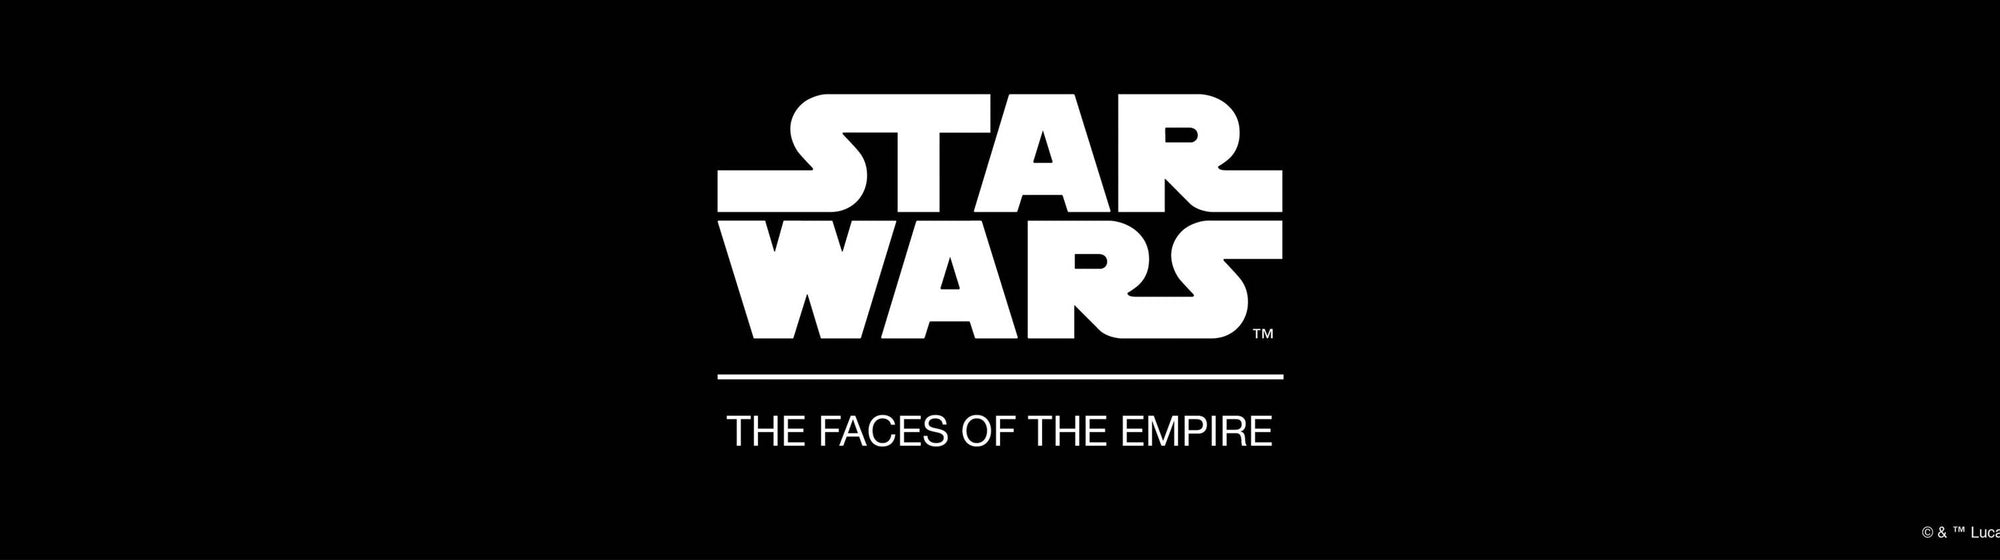 New Zealand Star Wars Mint Faces of the Empire Series